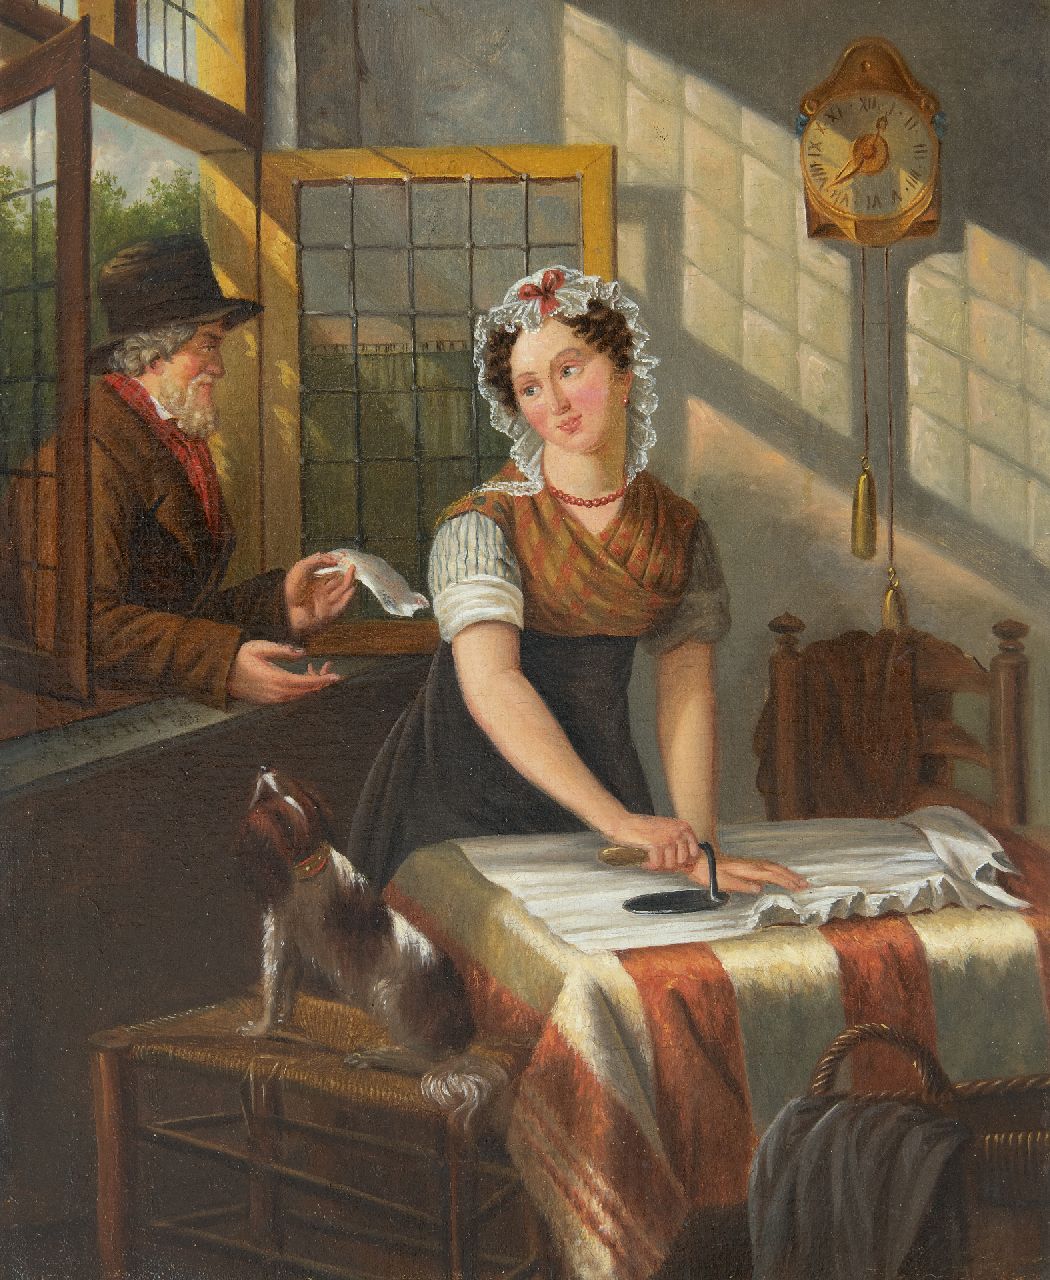 Braet von Uberfeldt J.  | Jan Braet von Uberfeldt | Paintings offered for sale | The love letter, oil on canvas 32.8 x 27.5 cm, signed c.l.  with initials and in full on the stretcher and dated 1852